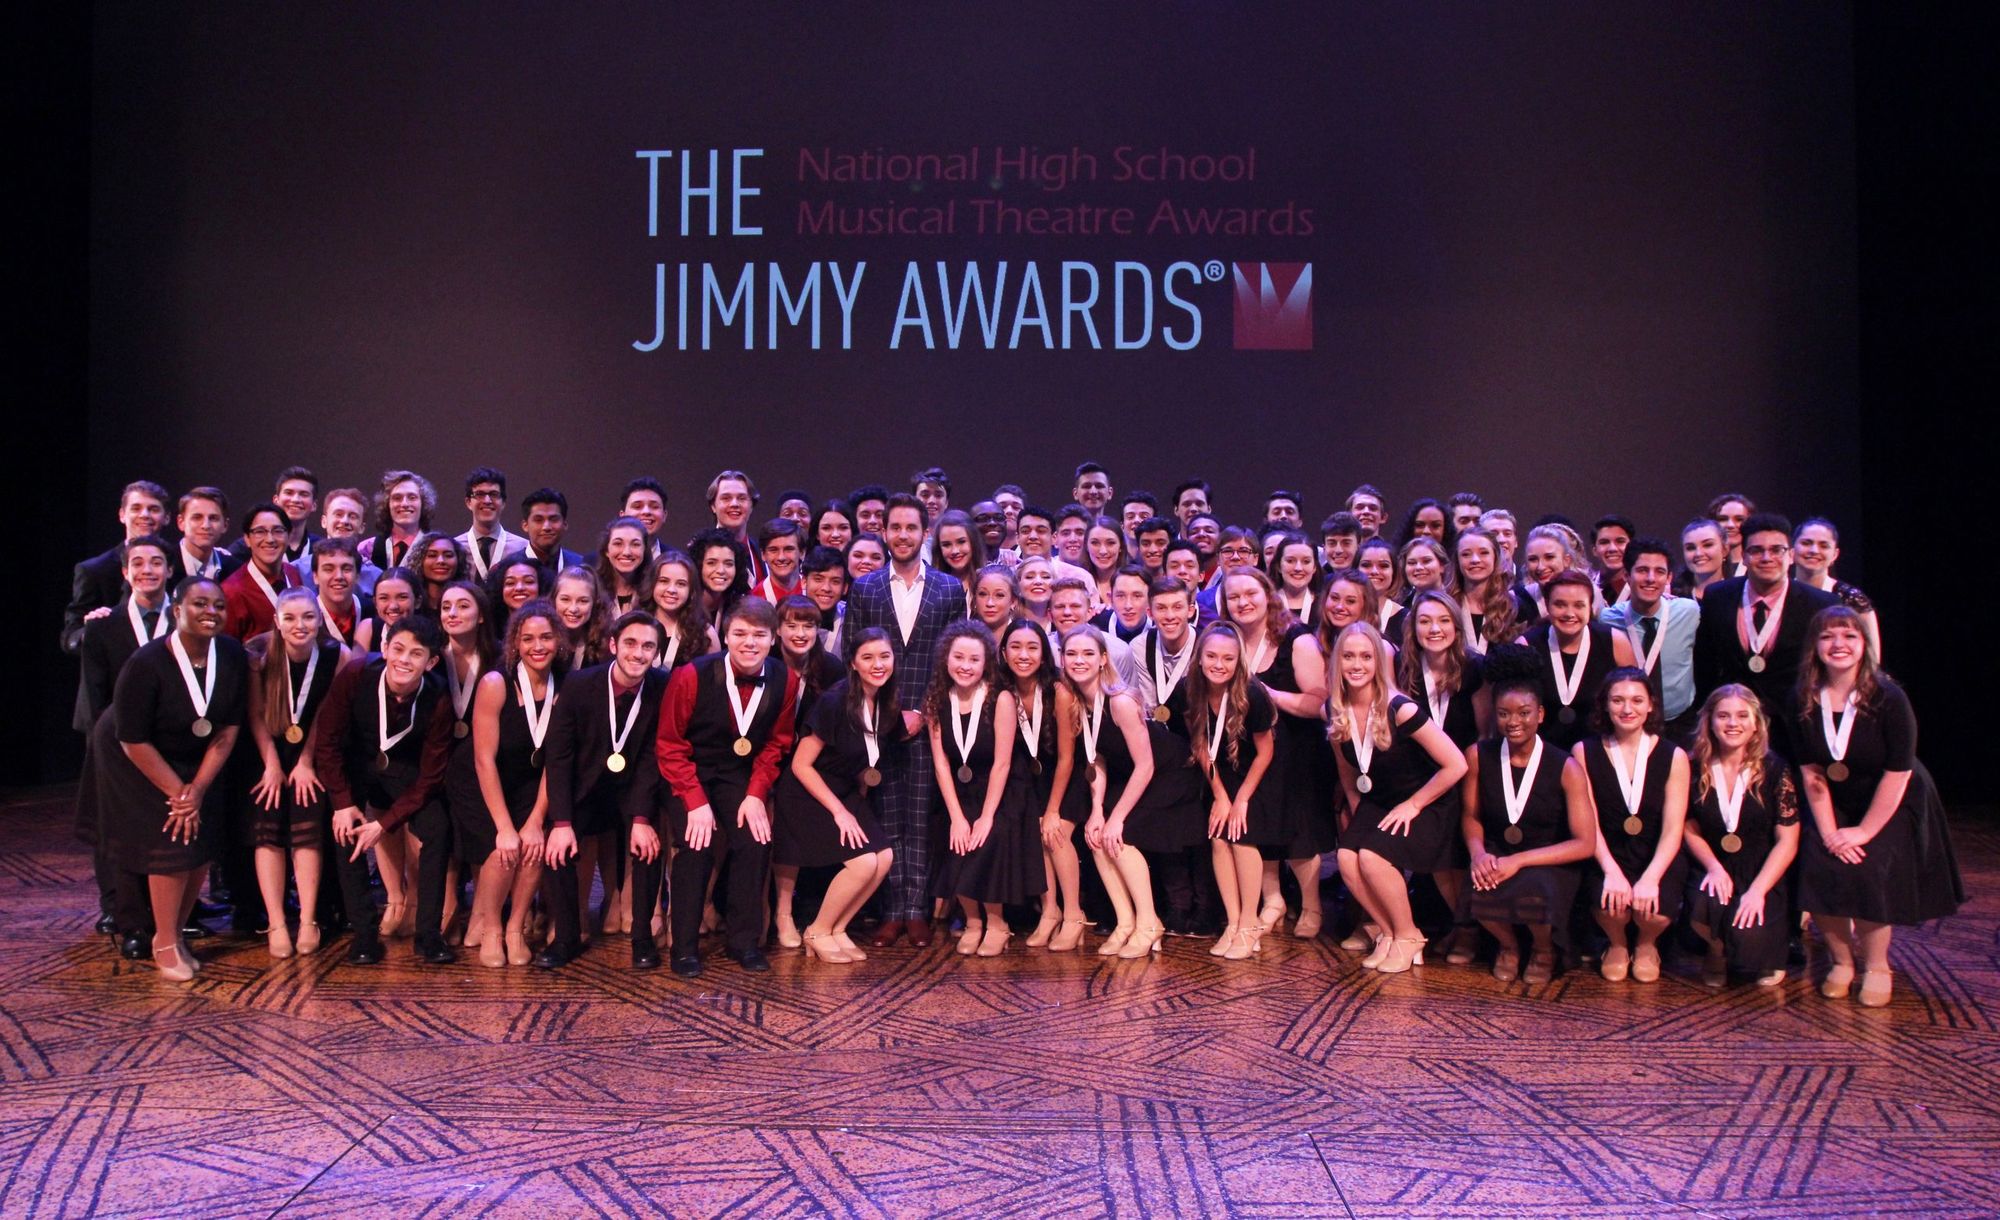 Jimmy Awards sets date for virtual ceremony in 2021